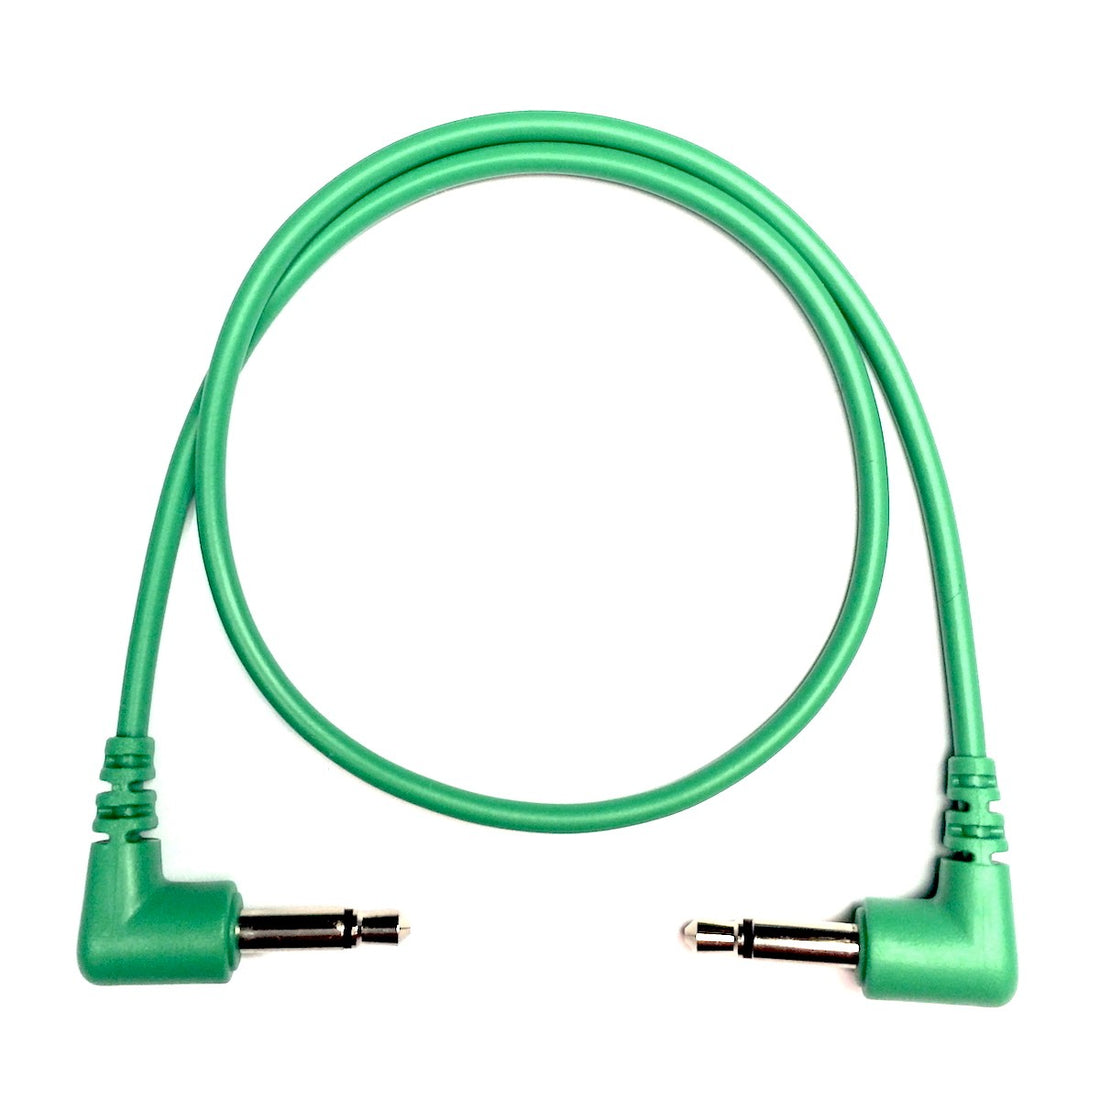 Patch Cable - Emerald 30cm (6 Pack)